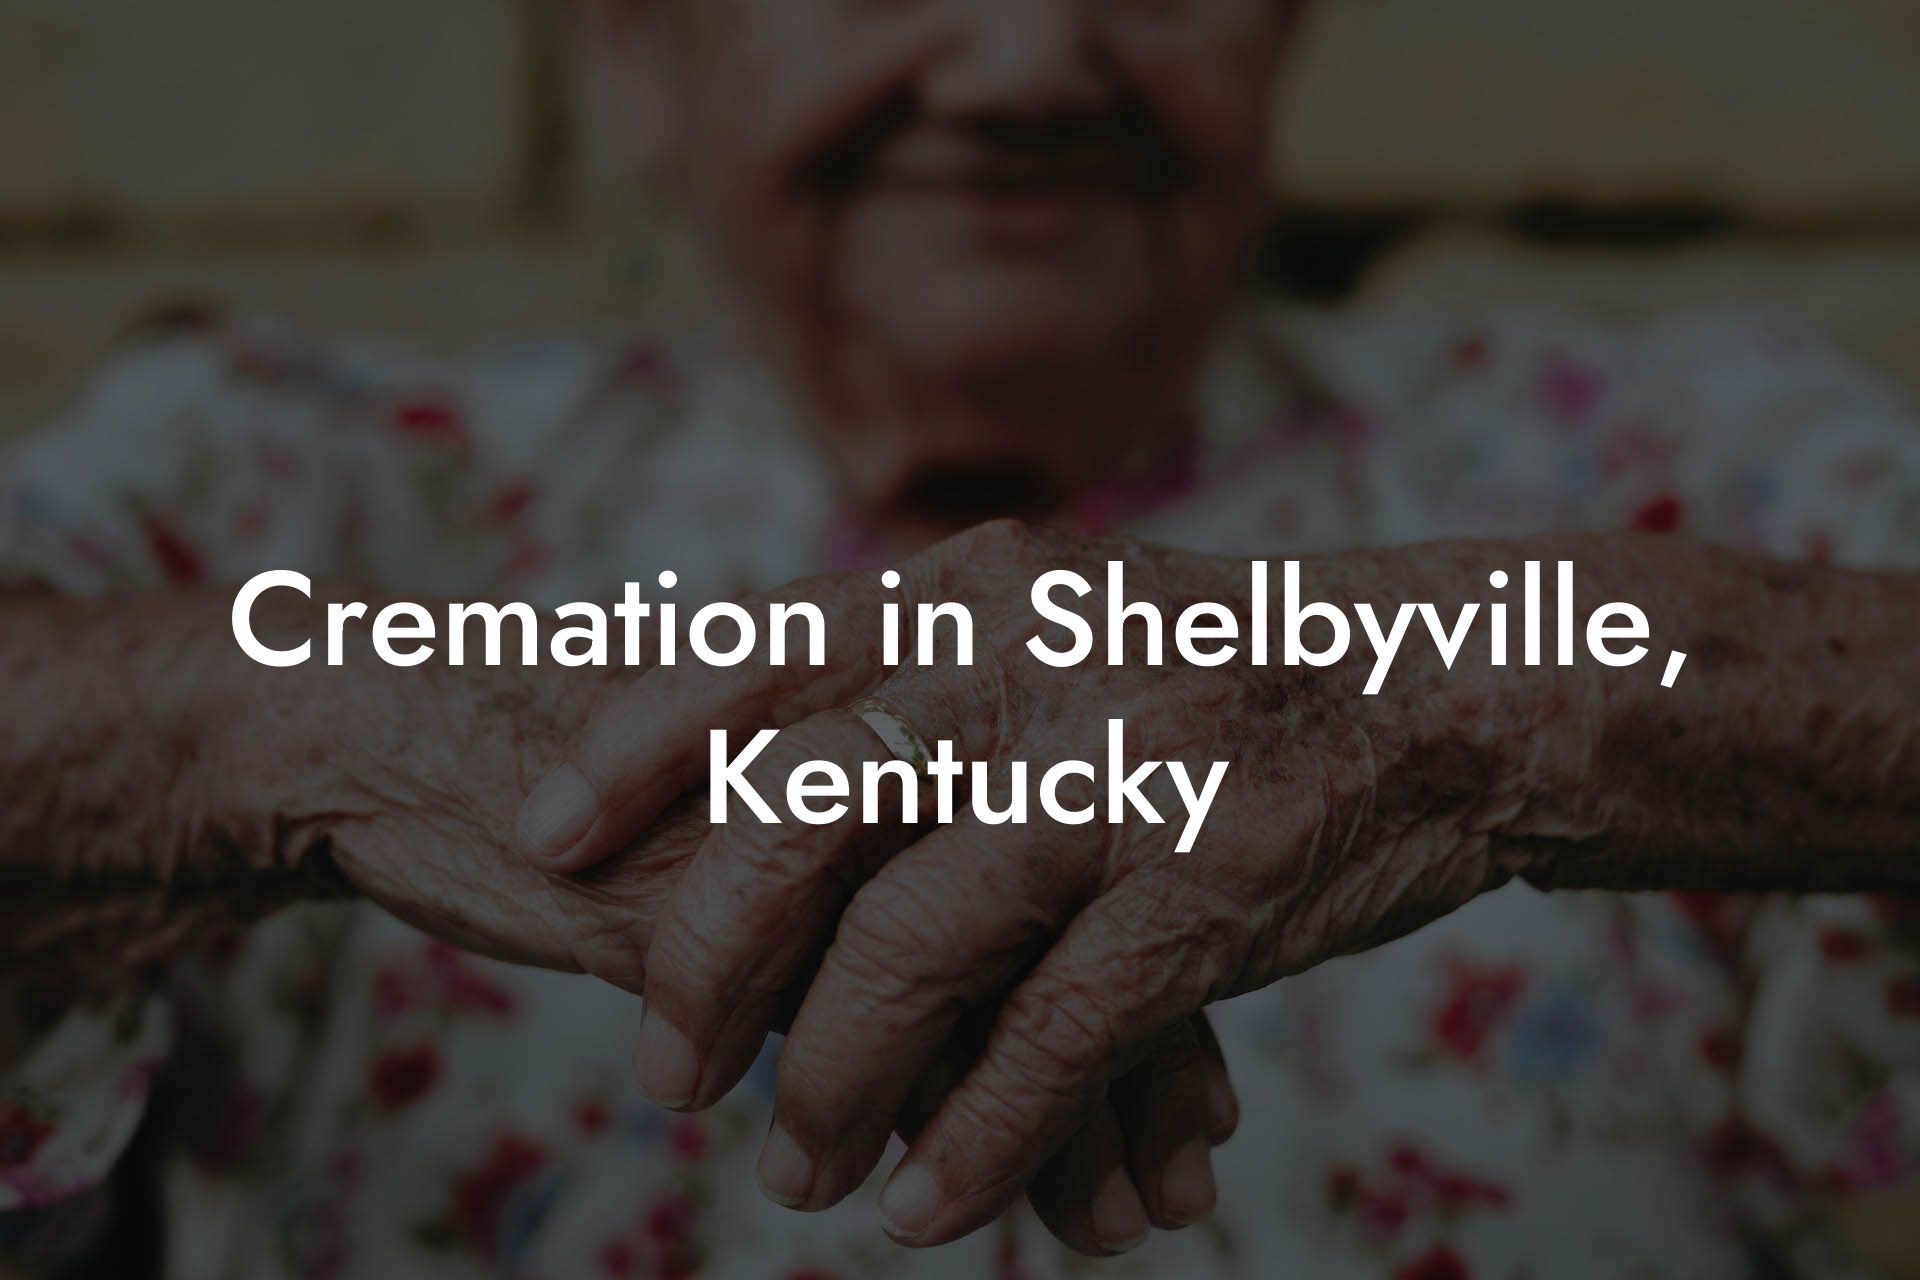 Cremation in Shelbyville, Kentucky